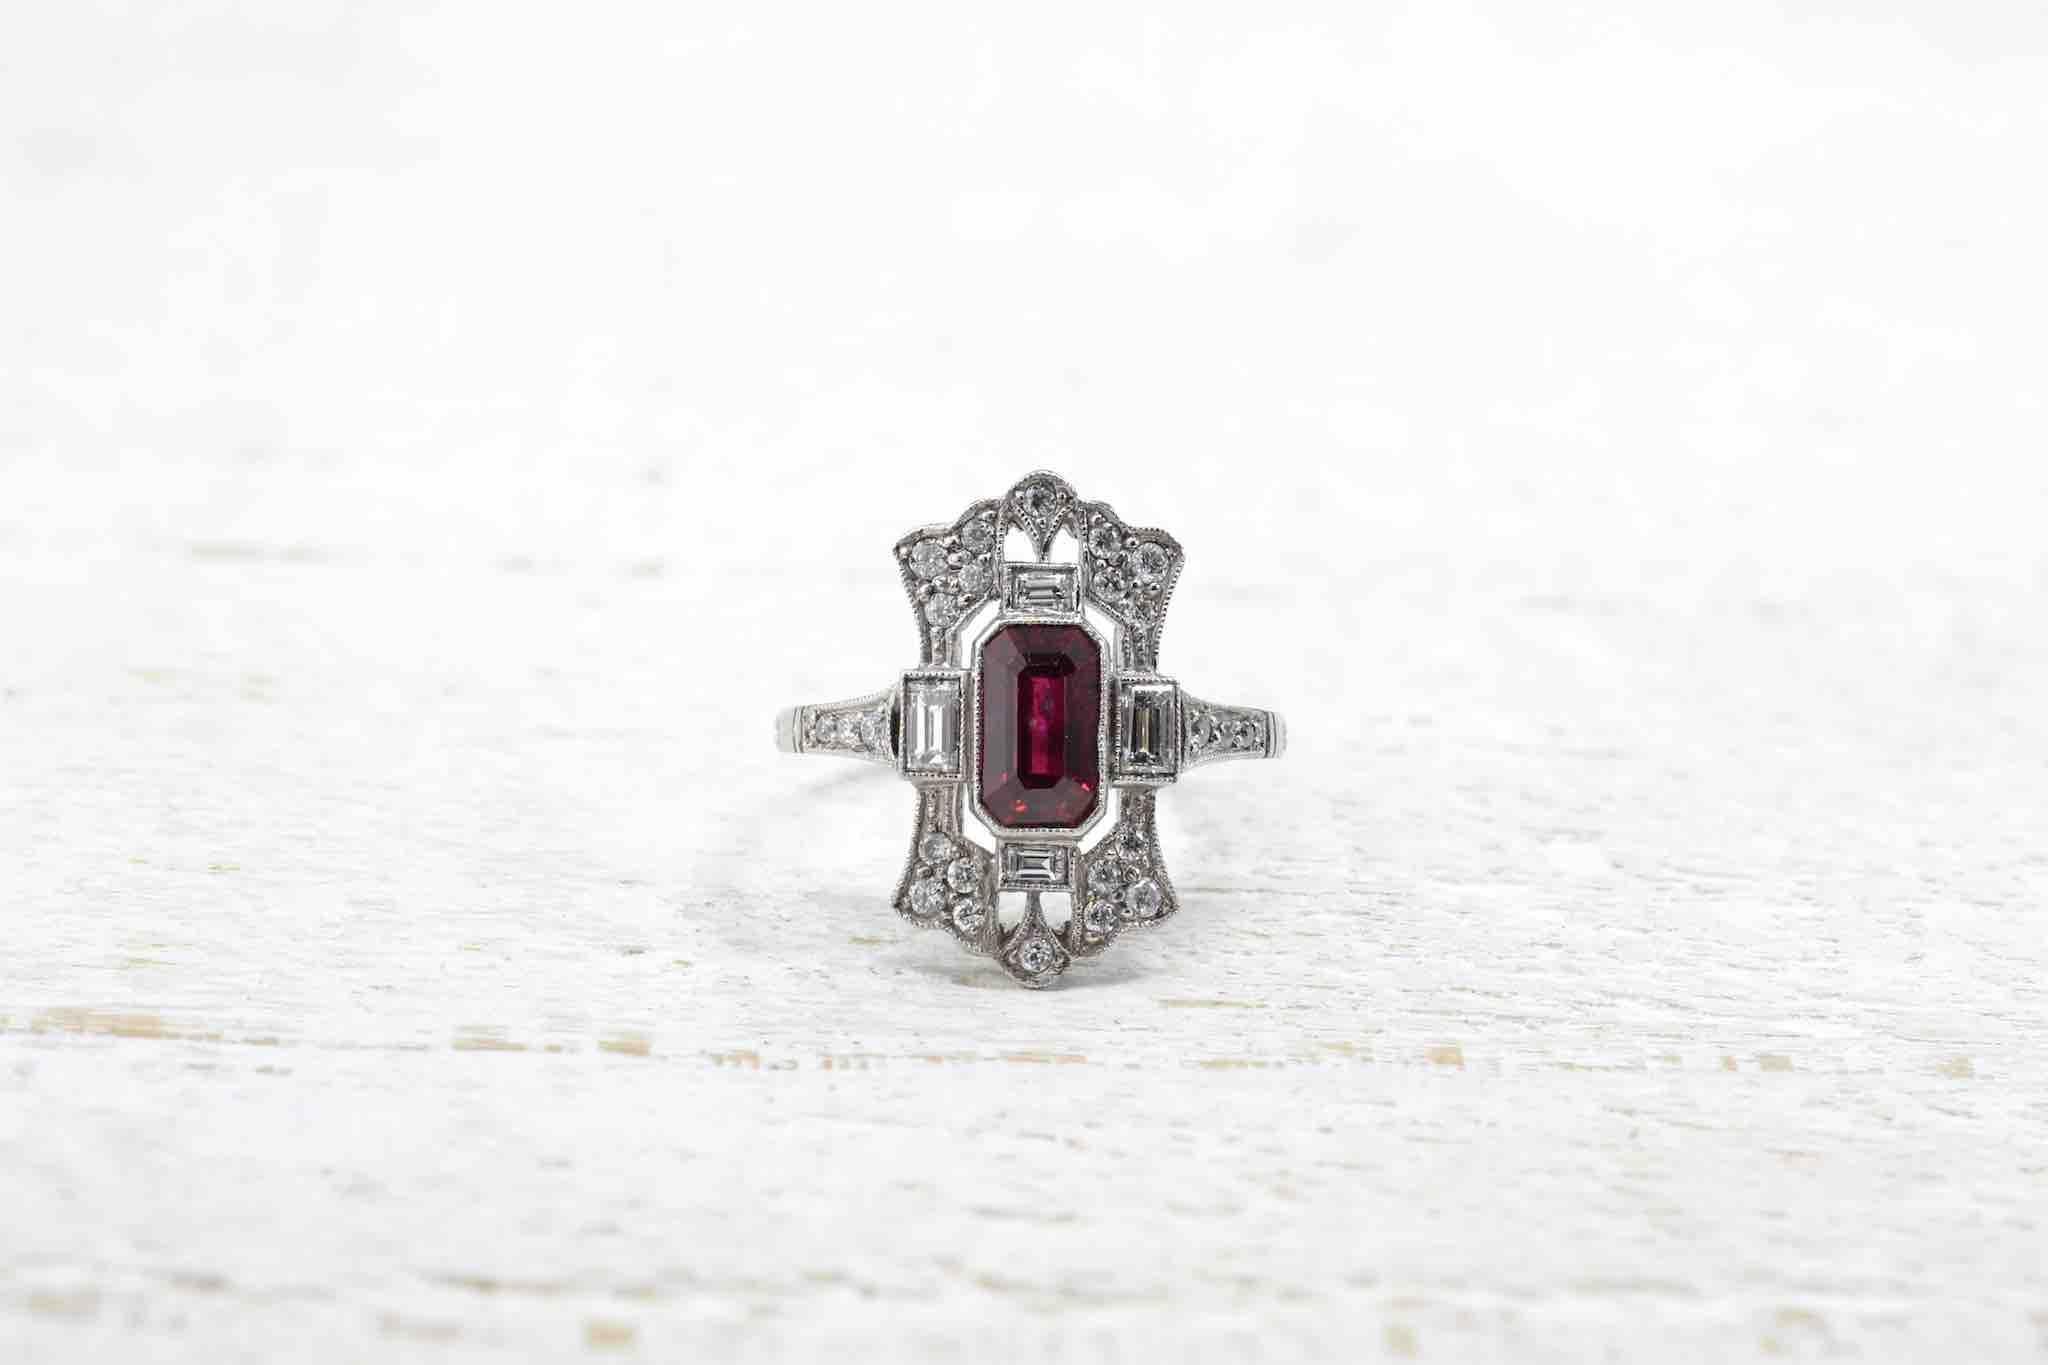 Stones: 0.60 carat ruby and diamonds
old brilliant cut and chopsticks for a weight
total of 0.20 carat.
Material: Platinum
Dimensions: 1.7 cm length on finger
Period: 1920
Weight: 3.7g
Size: 52 (free sizing)
Certificate
Ref. : 22613